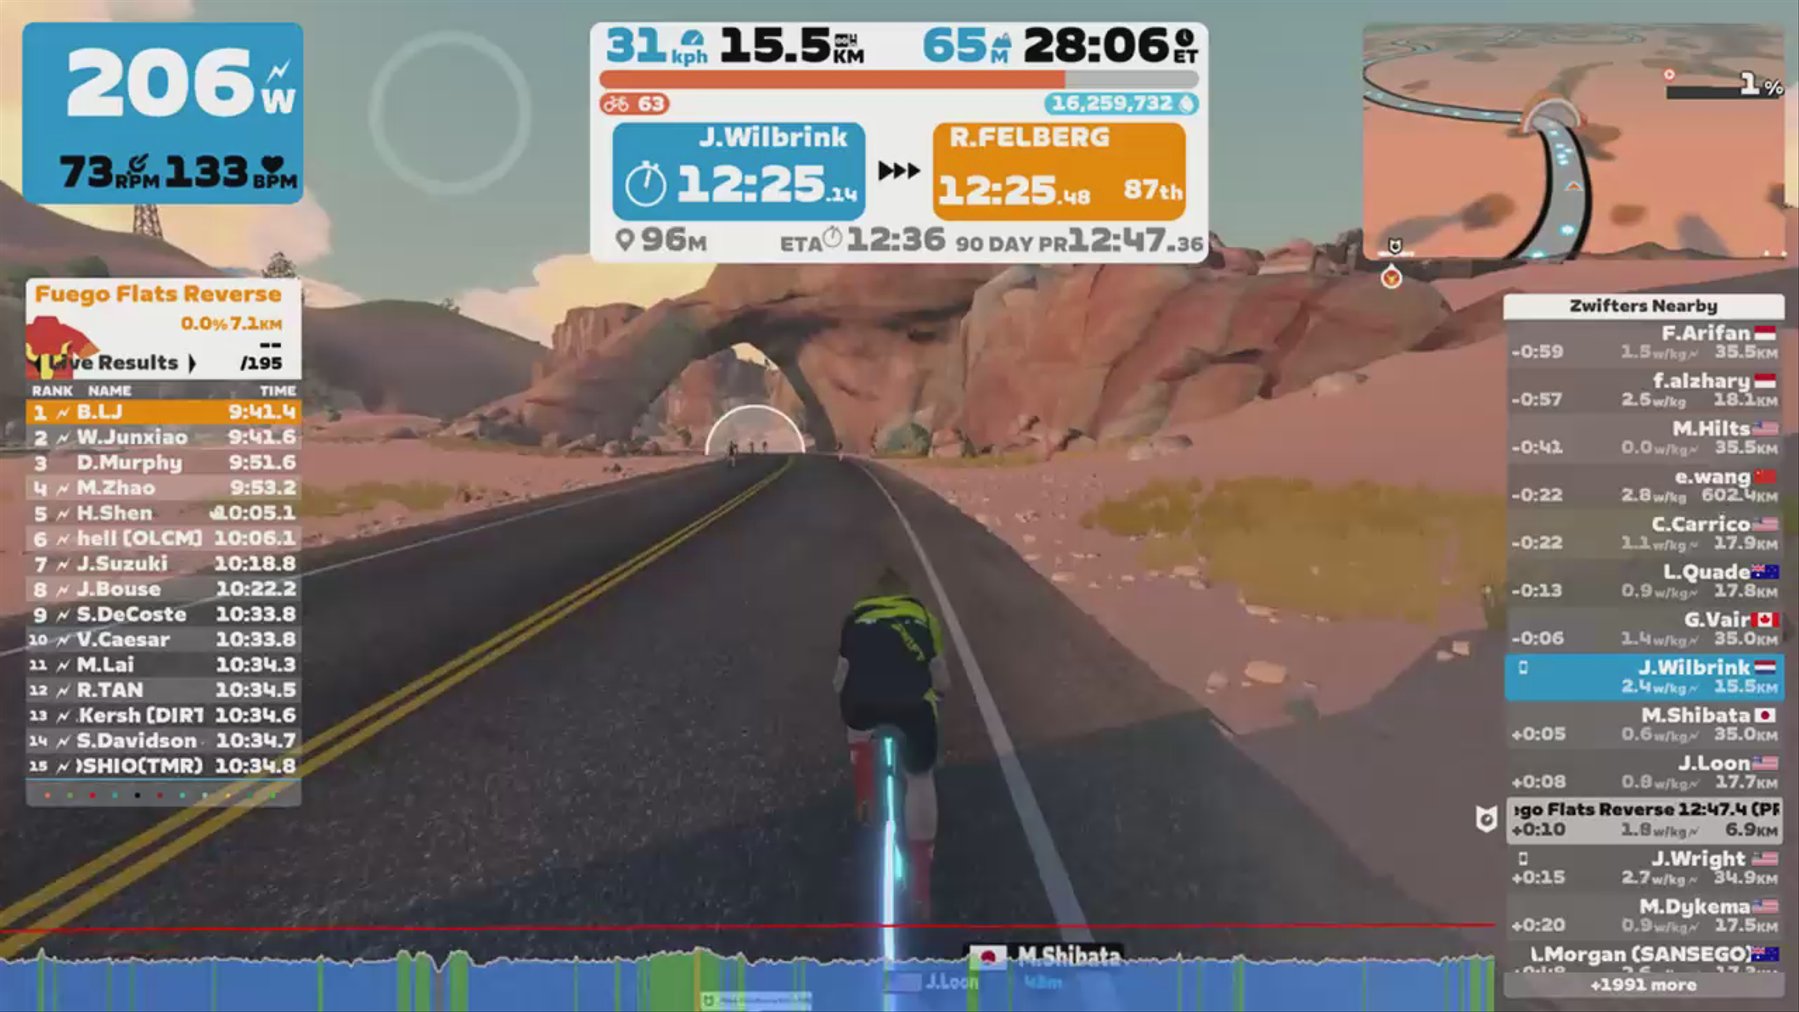 Zwift - Pacer Group Ride: Sugar Cookie in Watopia with Miguel